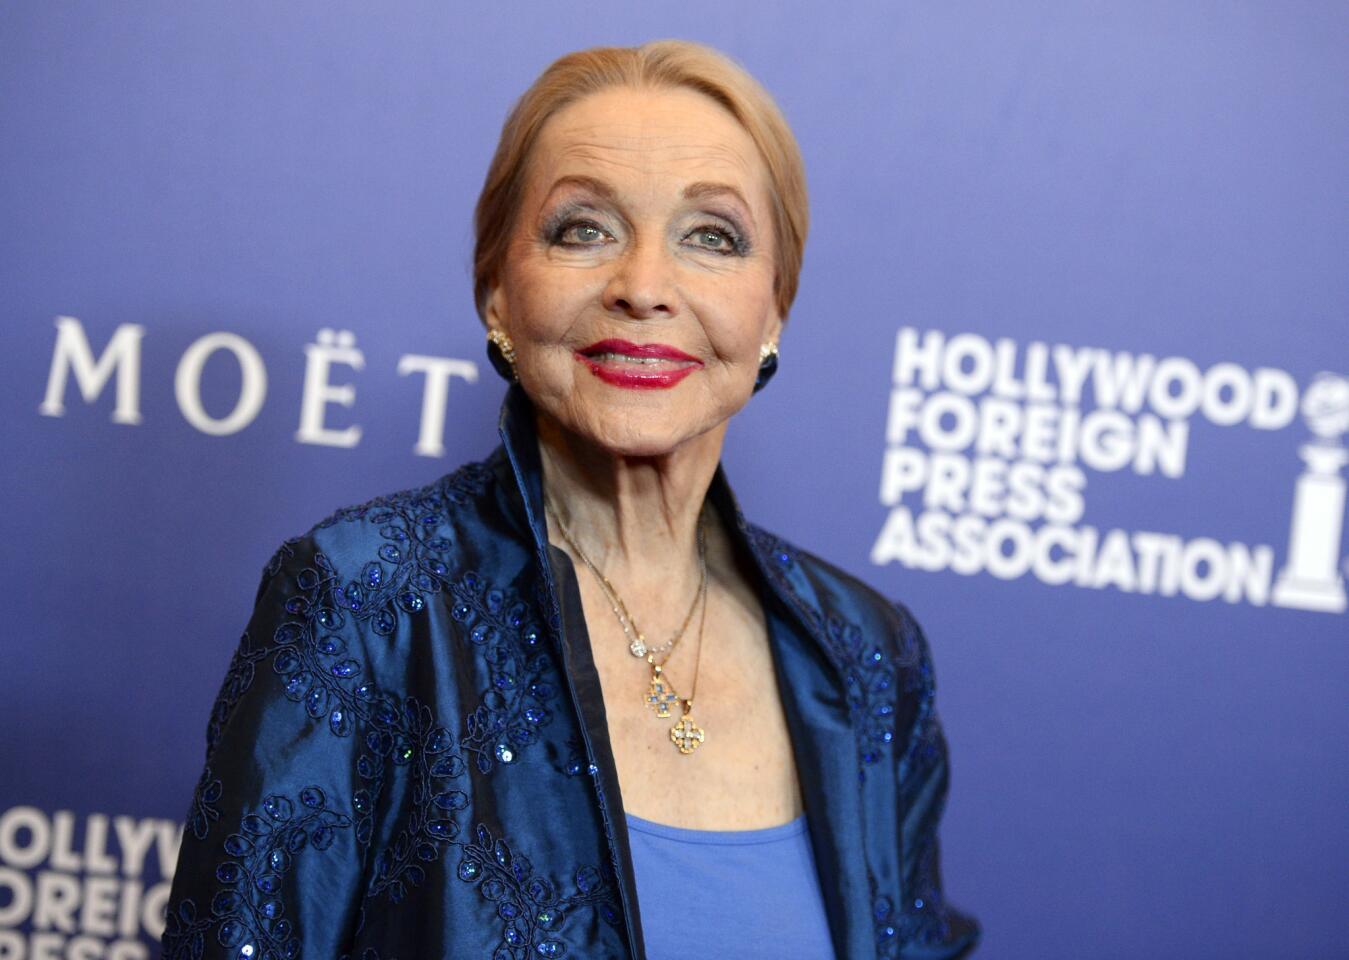 In this Aug. 14, 2014, photo, Anne Jeffreys arrives at the Hollywood Foreign Press Association's Grants Banquet in Beverly Hills, Calif. Jeffreys, an actress and opera singer who starred as Marion Kerby in the 1950s TV series "Topper," died Sept. 27, 2017, at age 94. Read more.